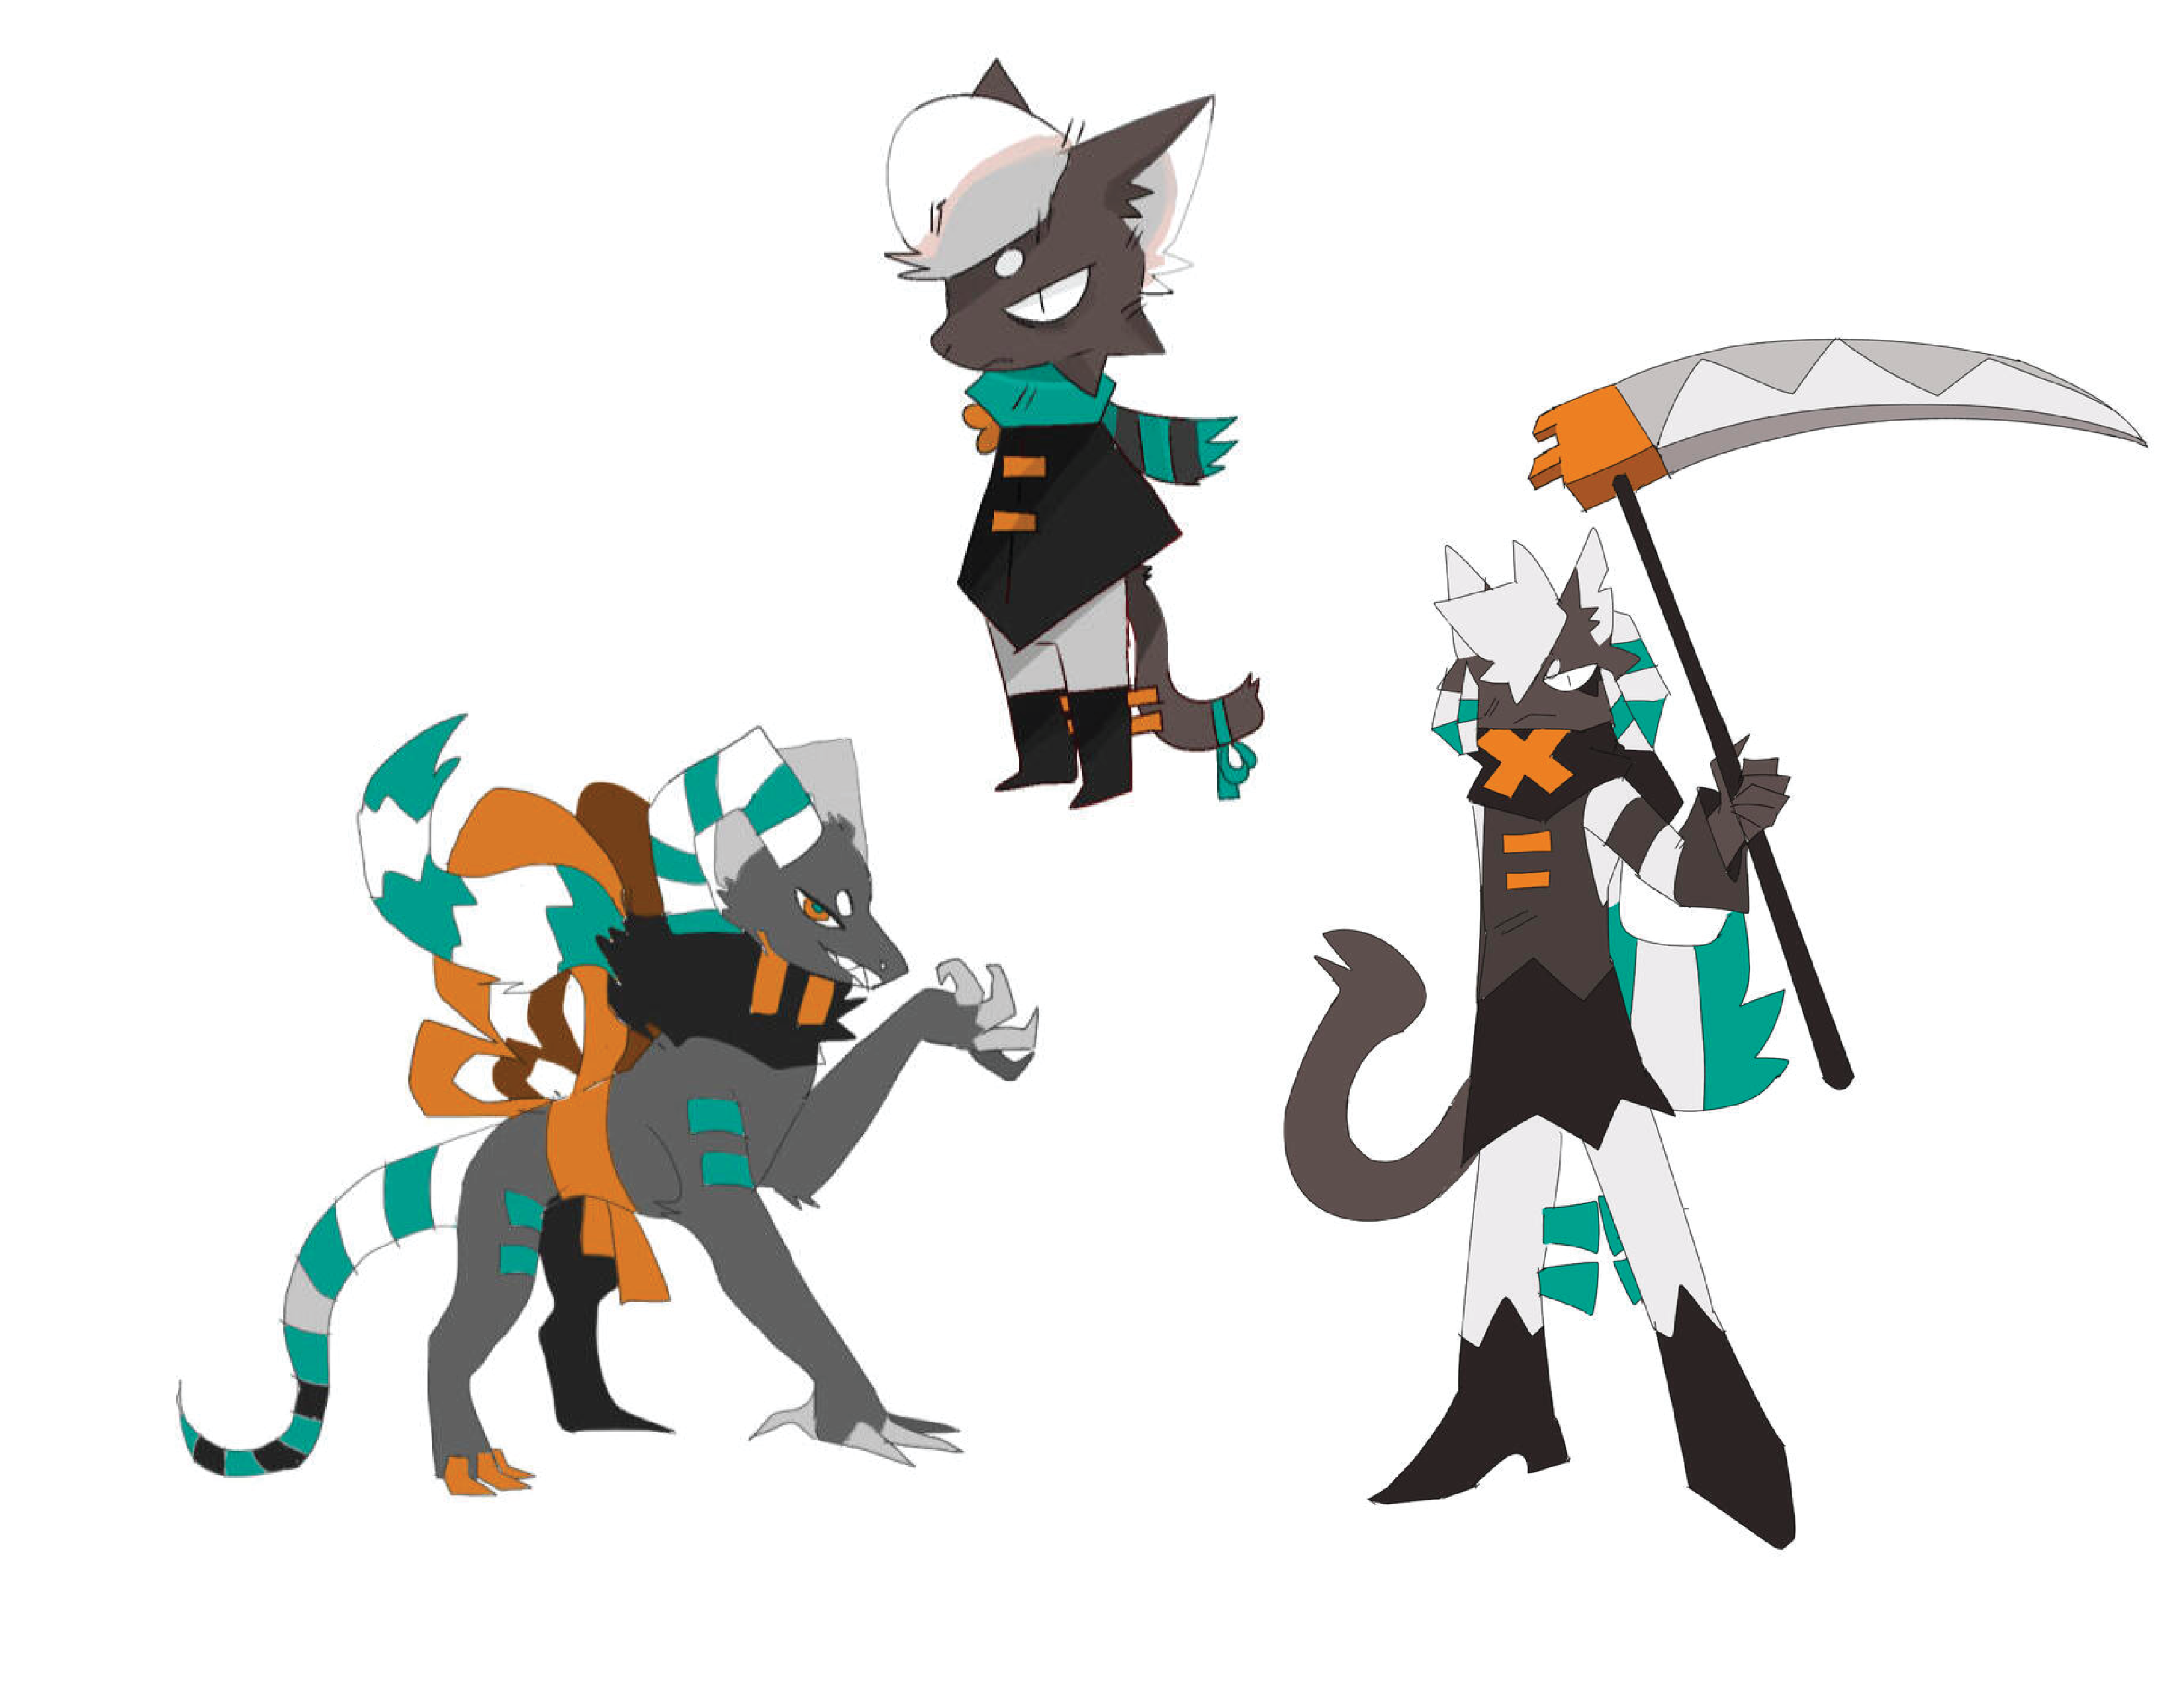 Designs for a scrapped small story,the cat design is a harvest grim reaper. Done in 2018.